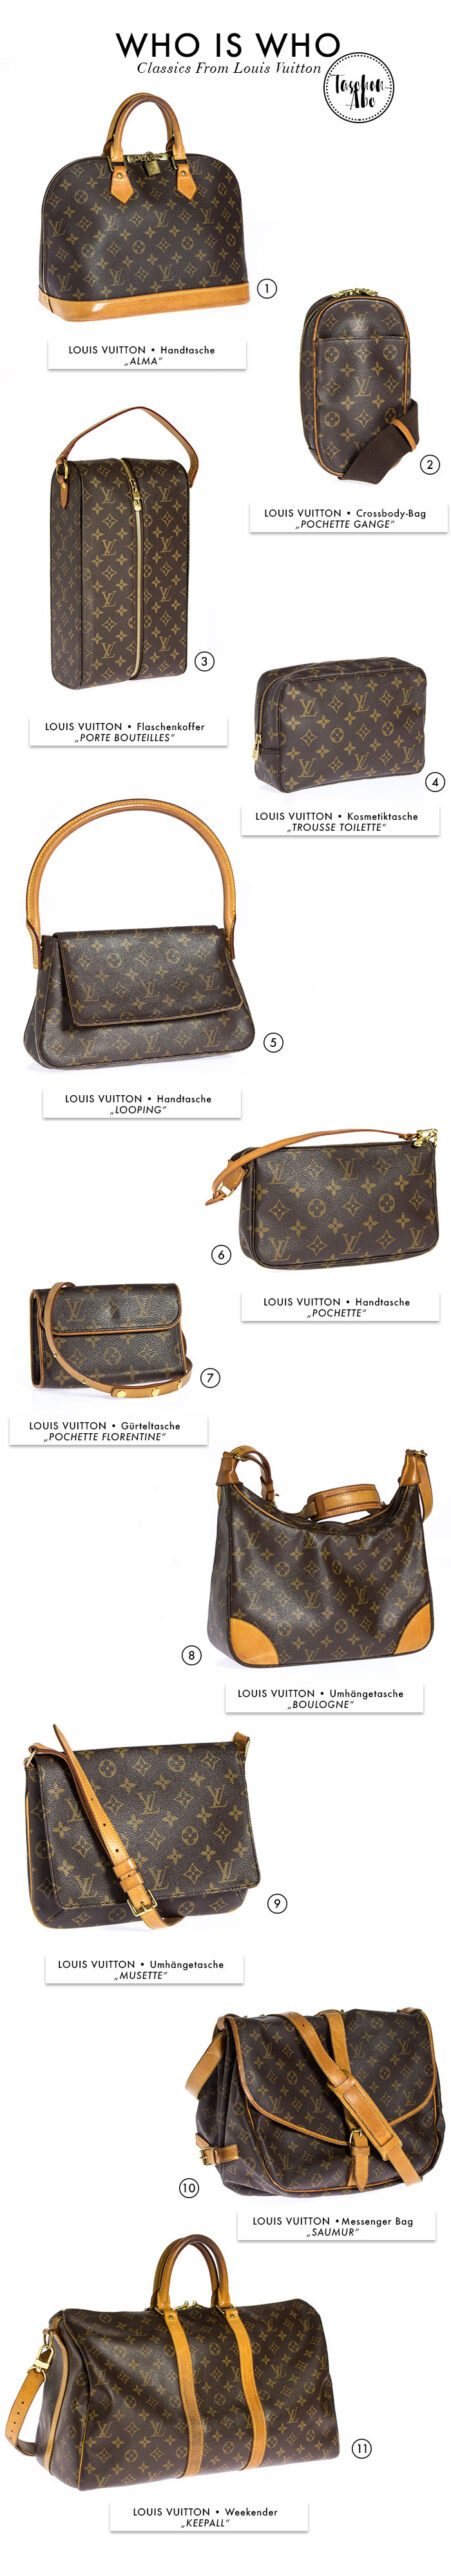 Louis Vuitton - Who is Who Bags